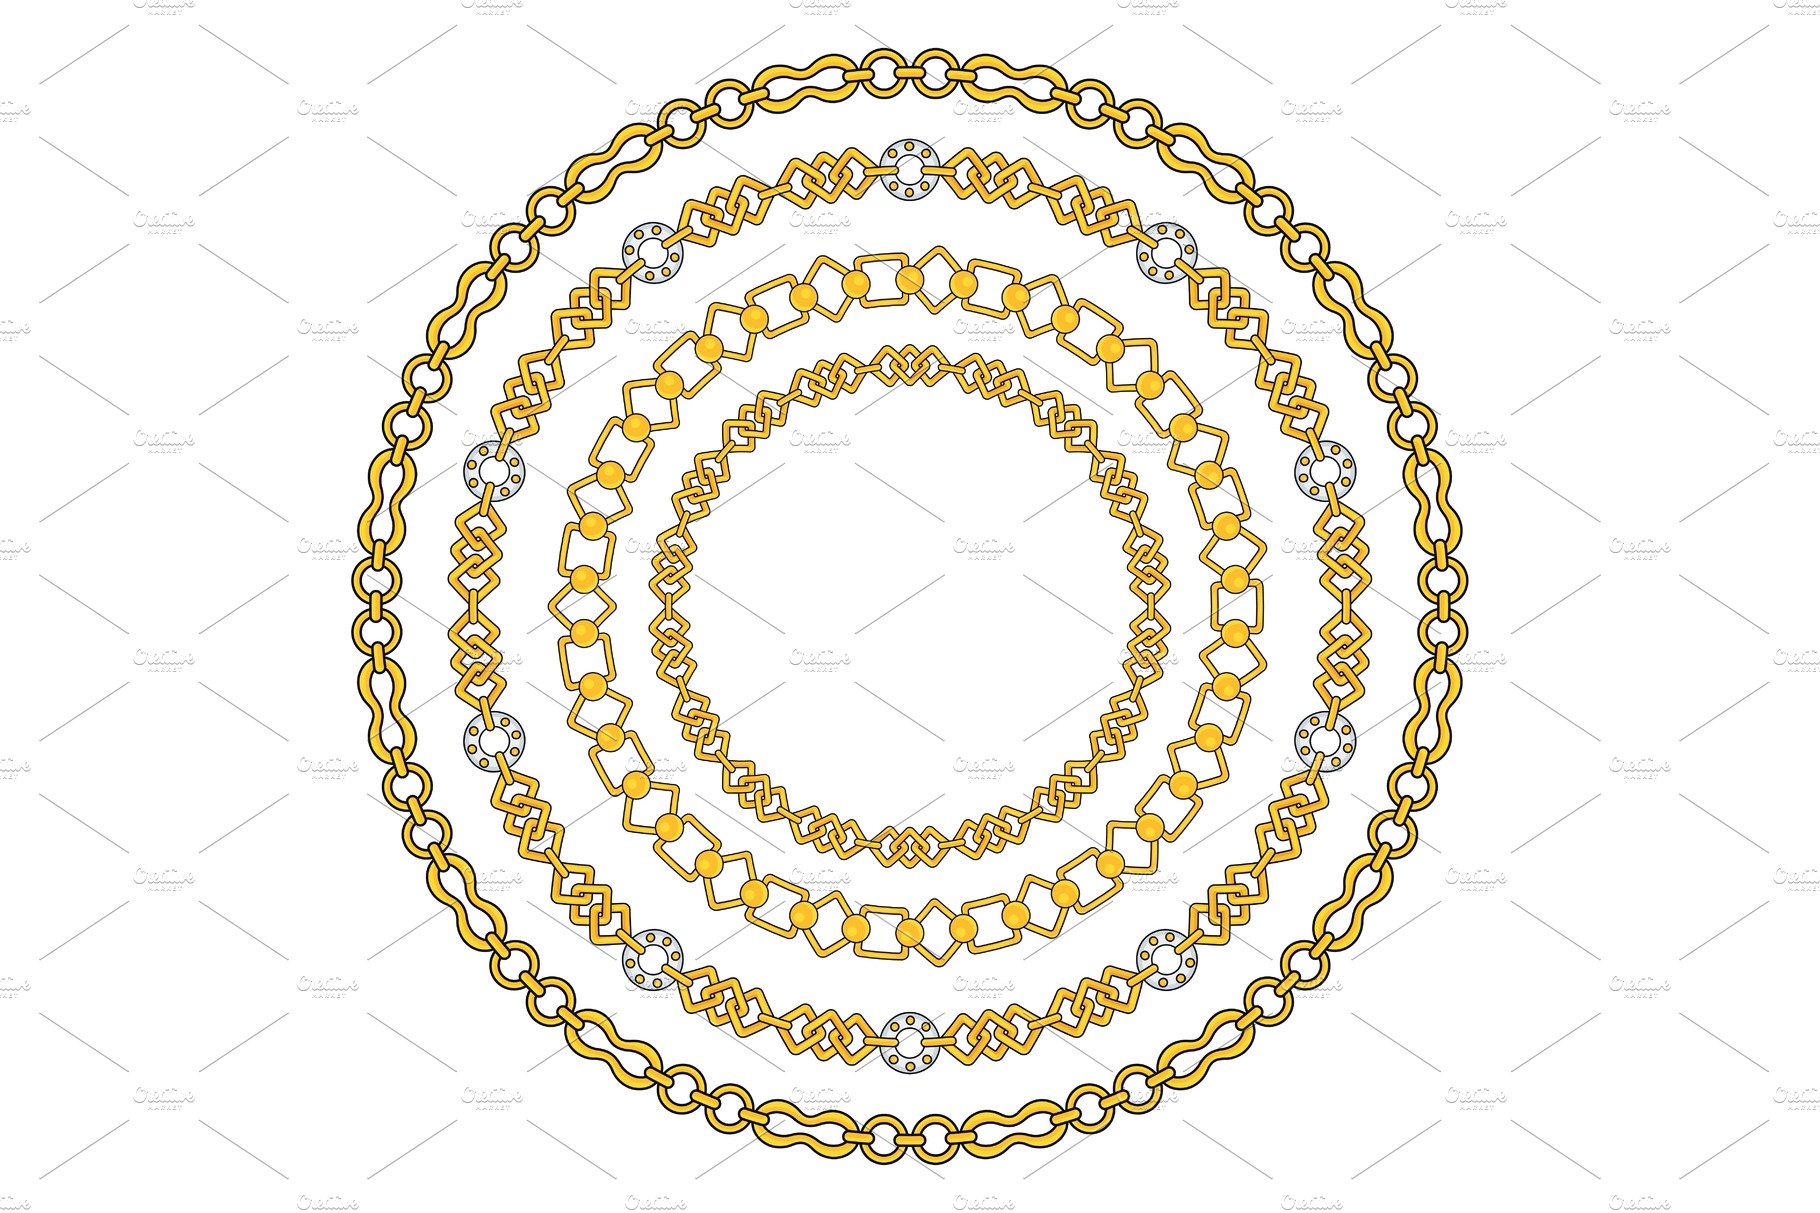 Round frame of figured gold chains cover image.